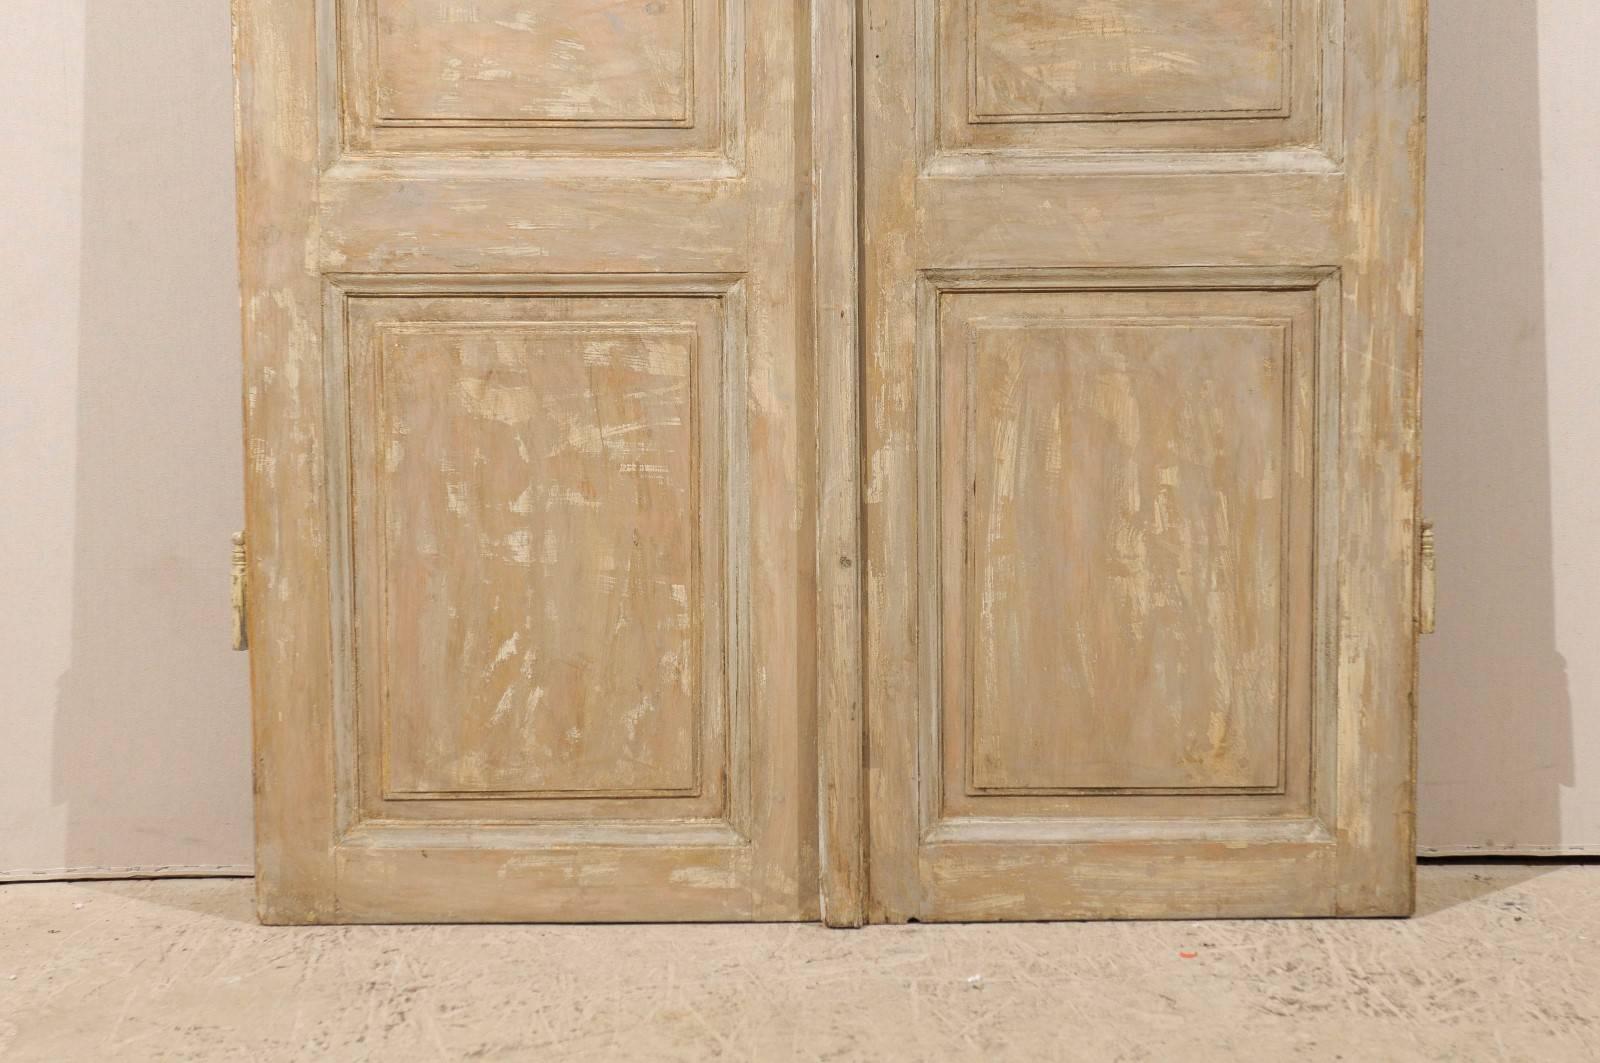 French Pair of 19th C. Three-Panel Painted Wood Doors, Approximately 8.75' Tall 2